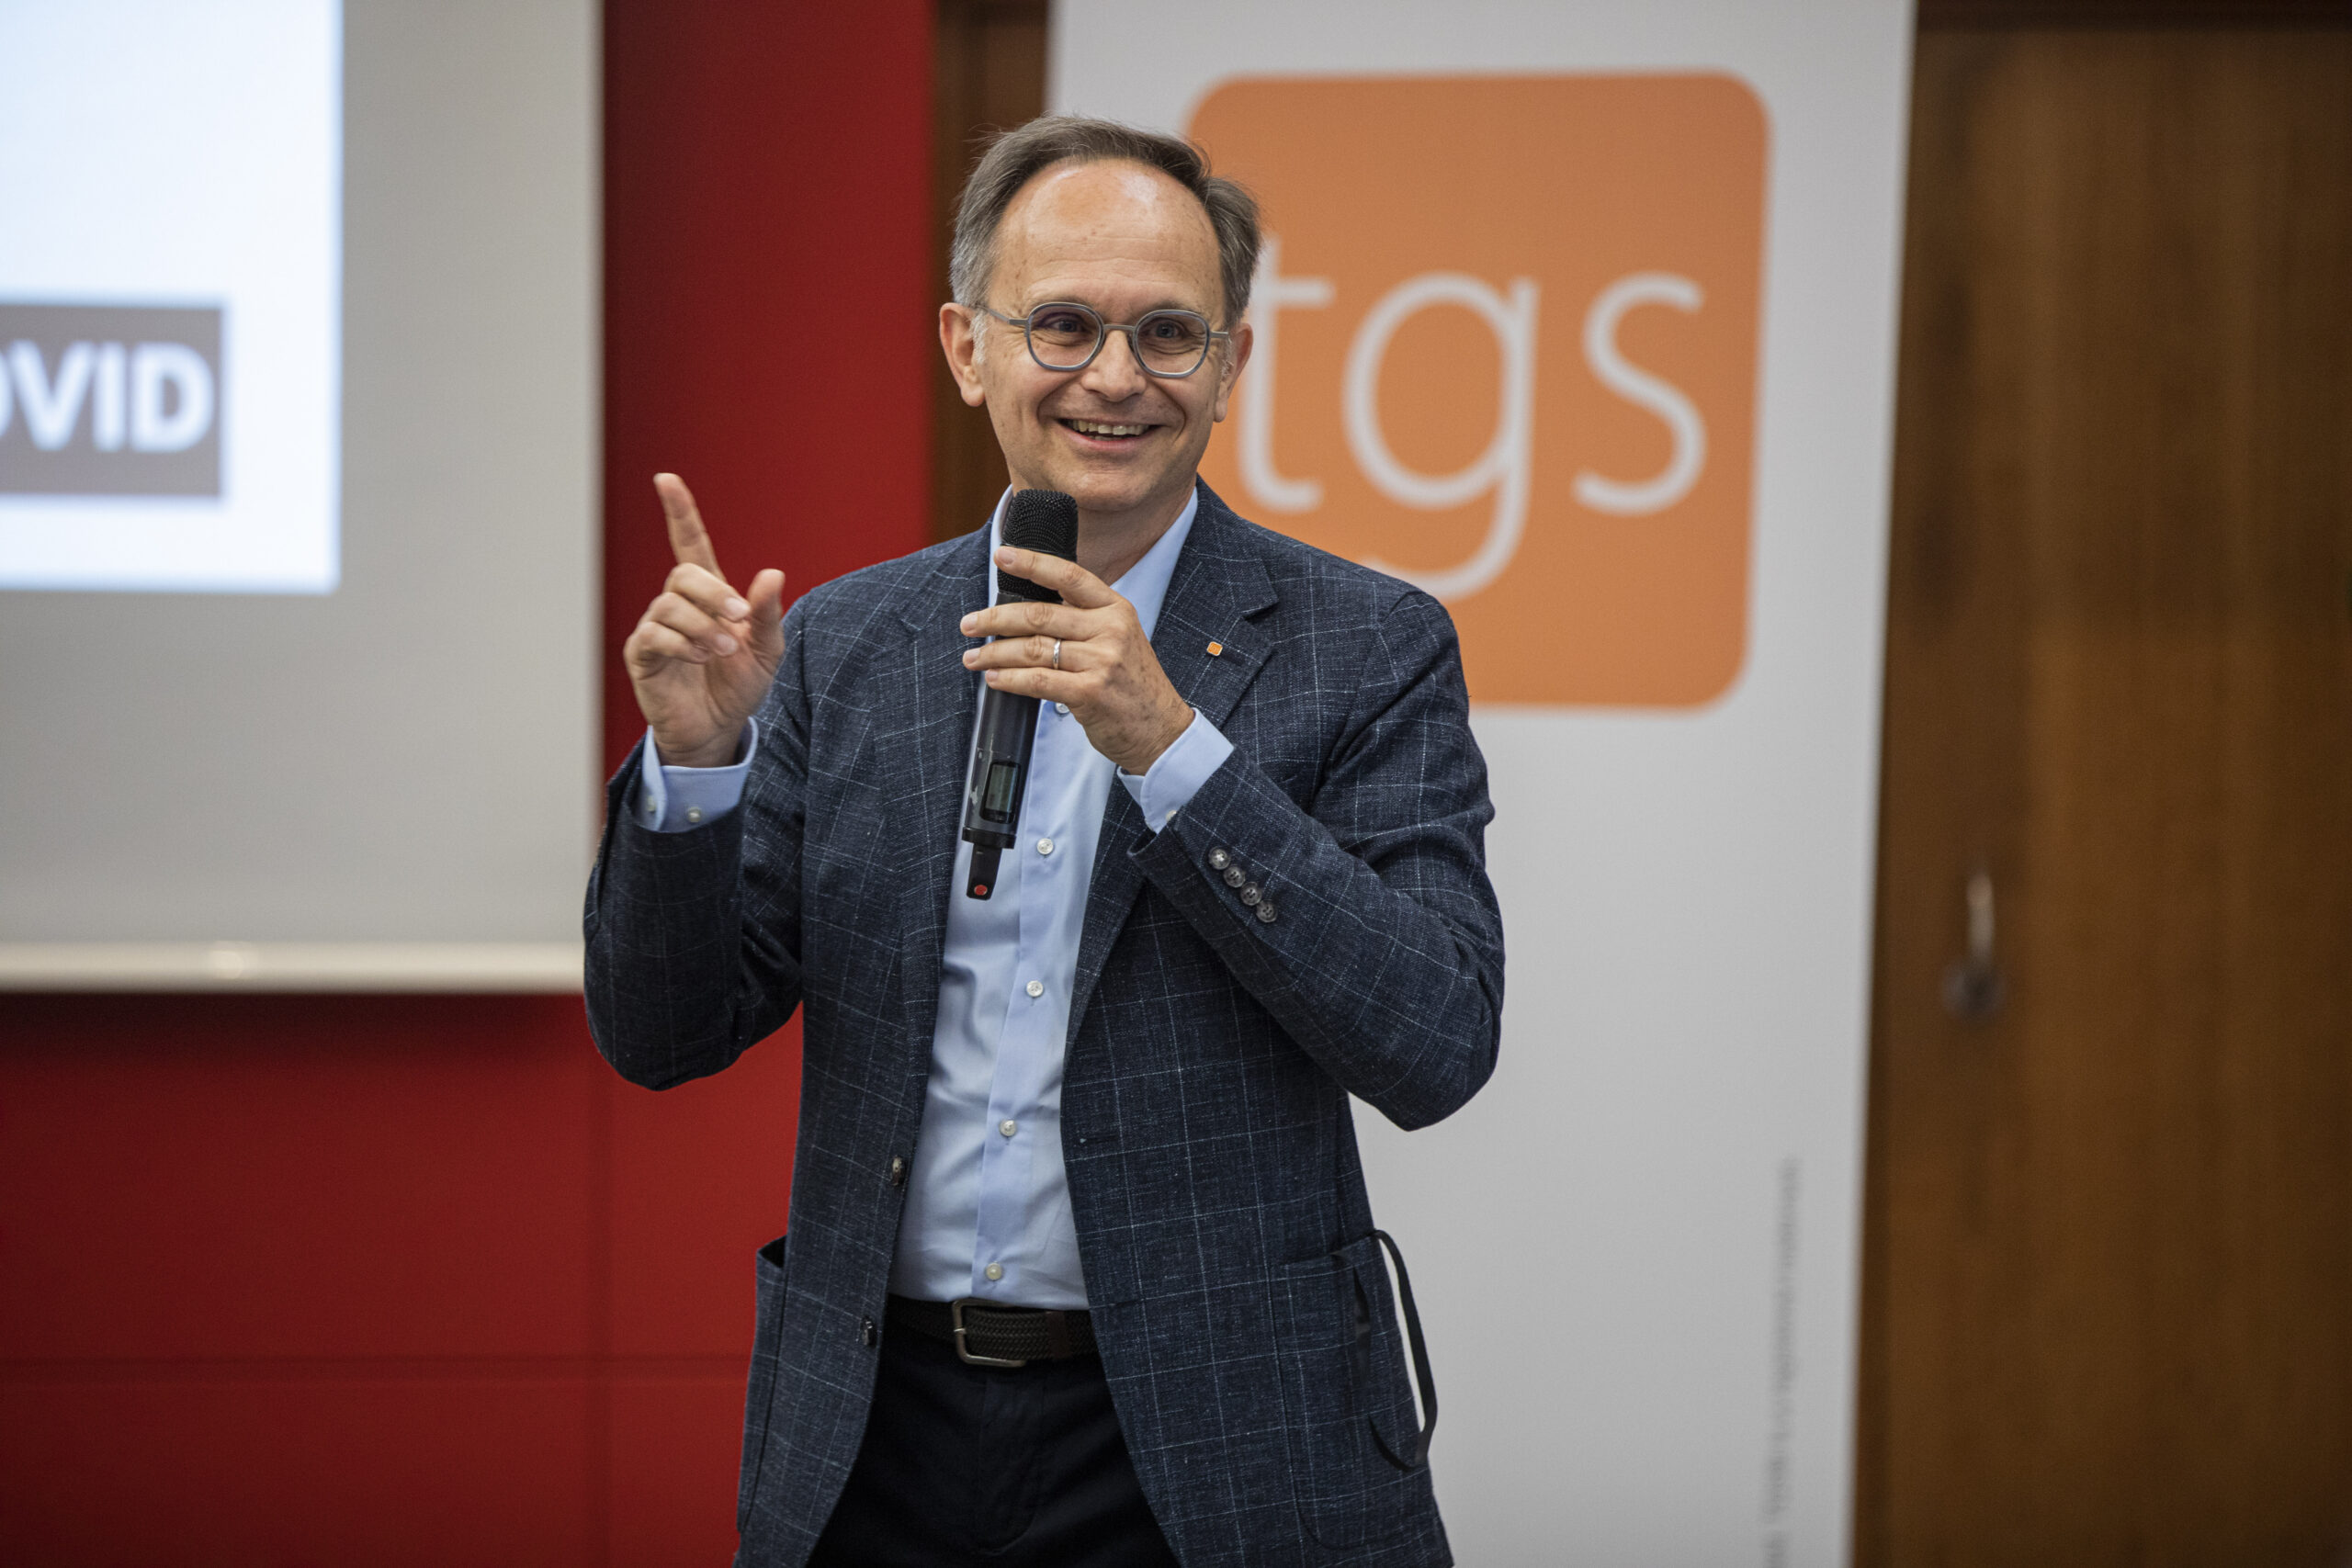 TGS President and CEO Marc Desjardins